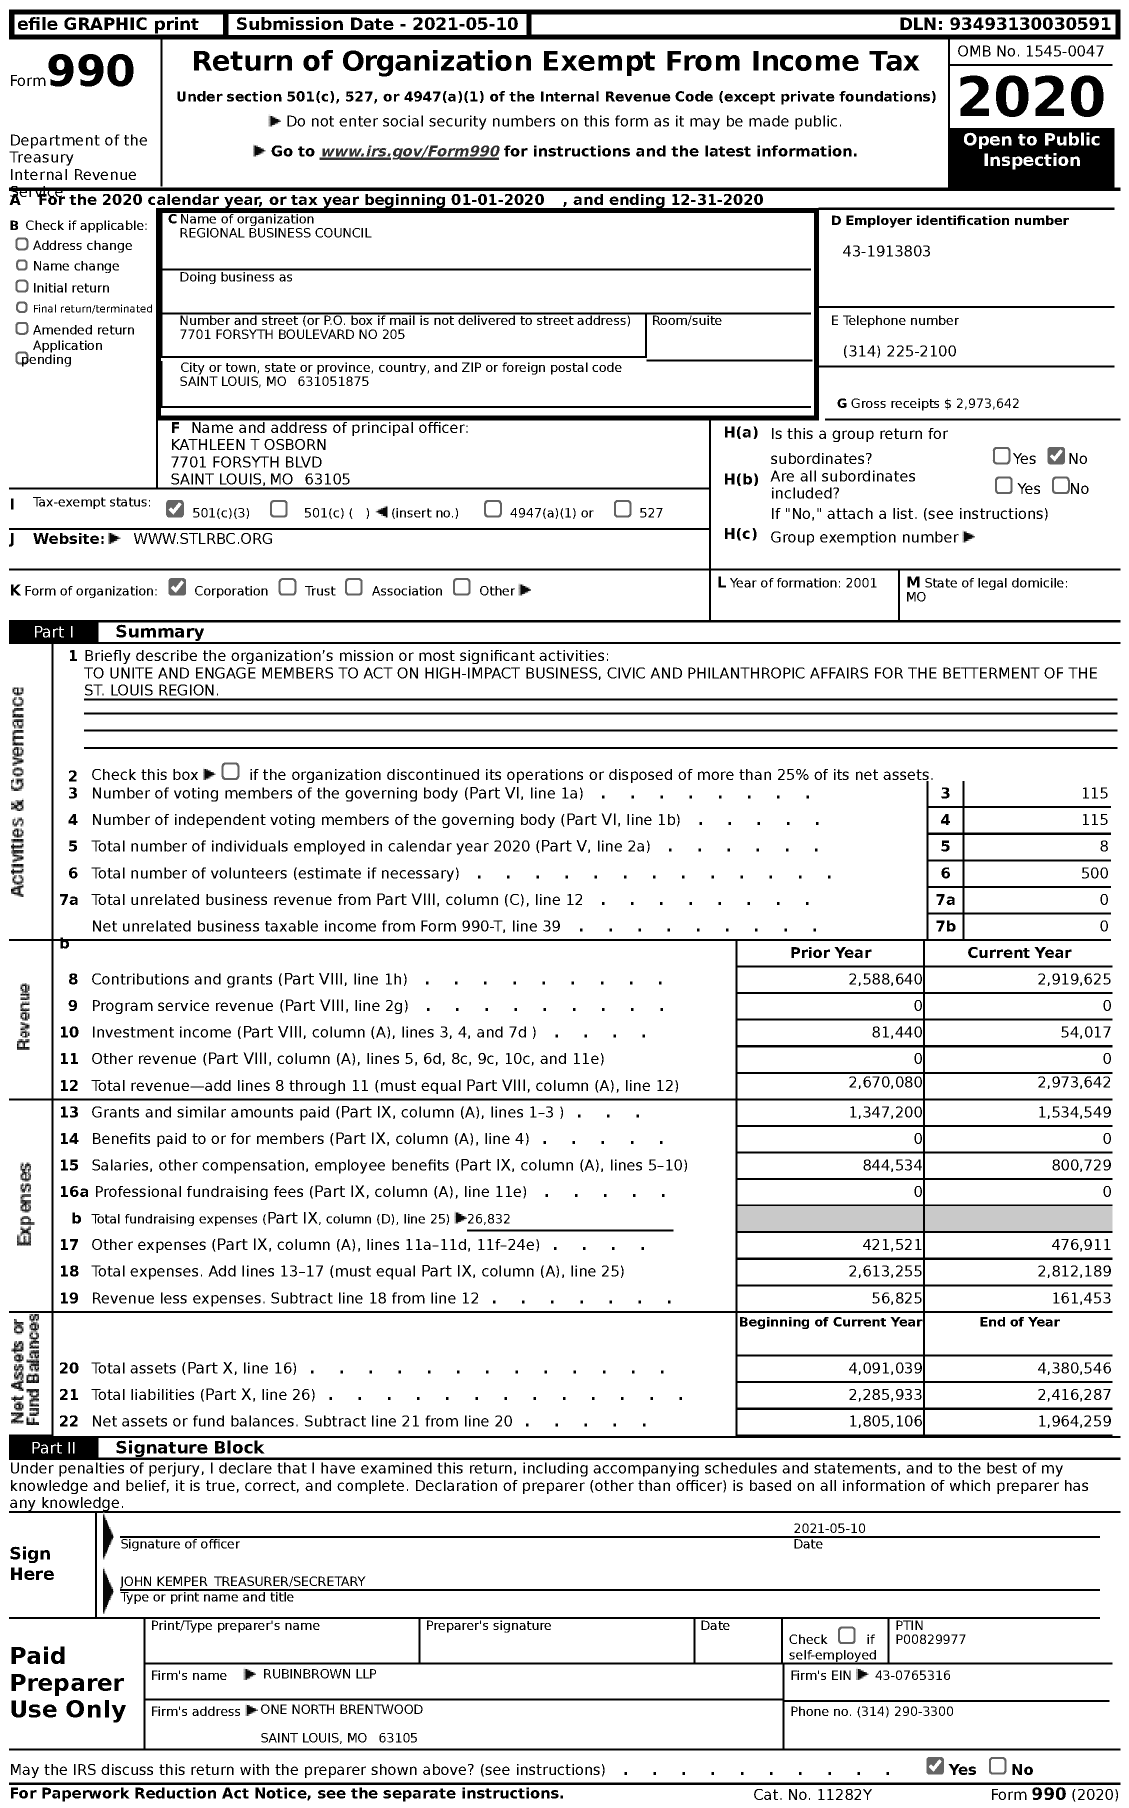 Image of first page of 2020 Form 990 for Regional Business Council (RBC)